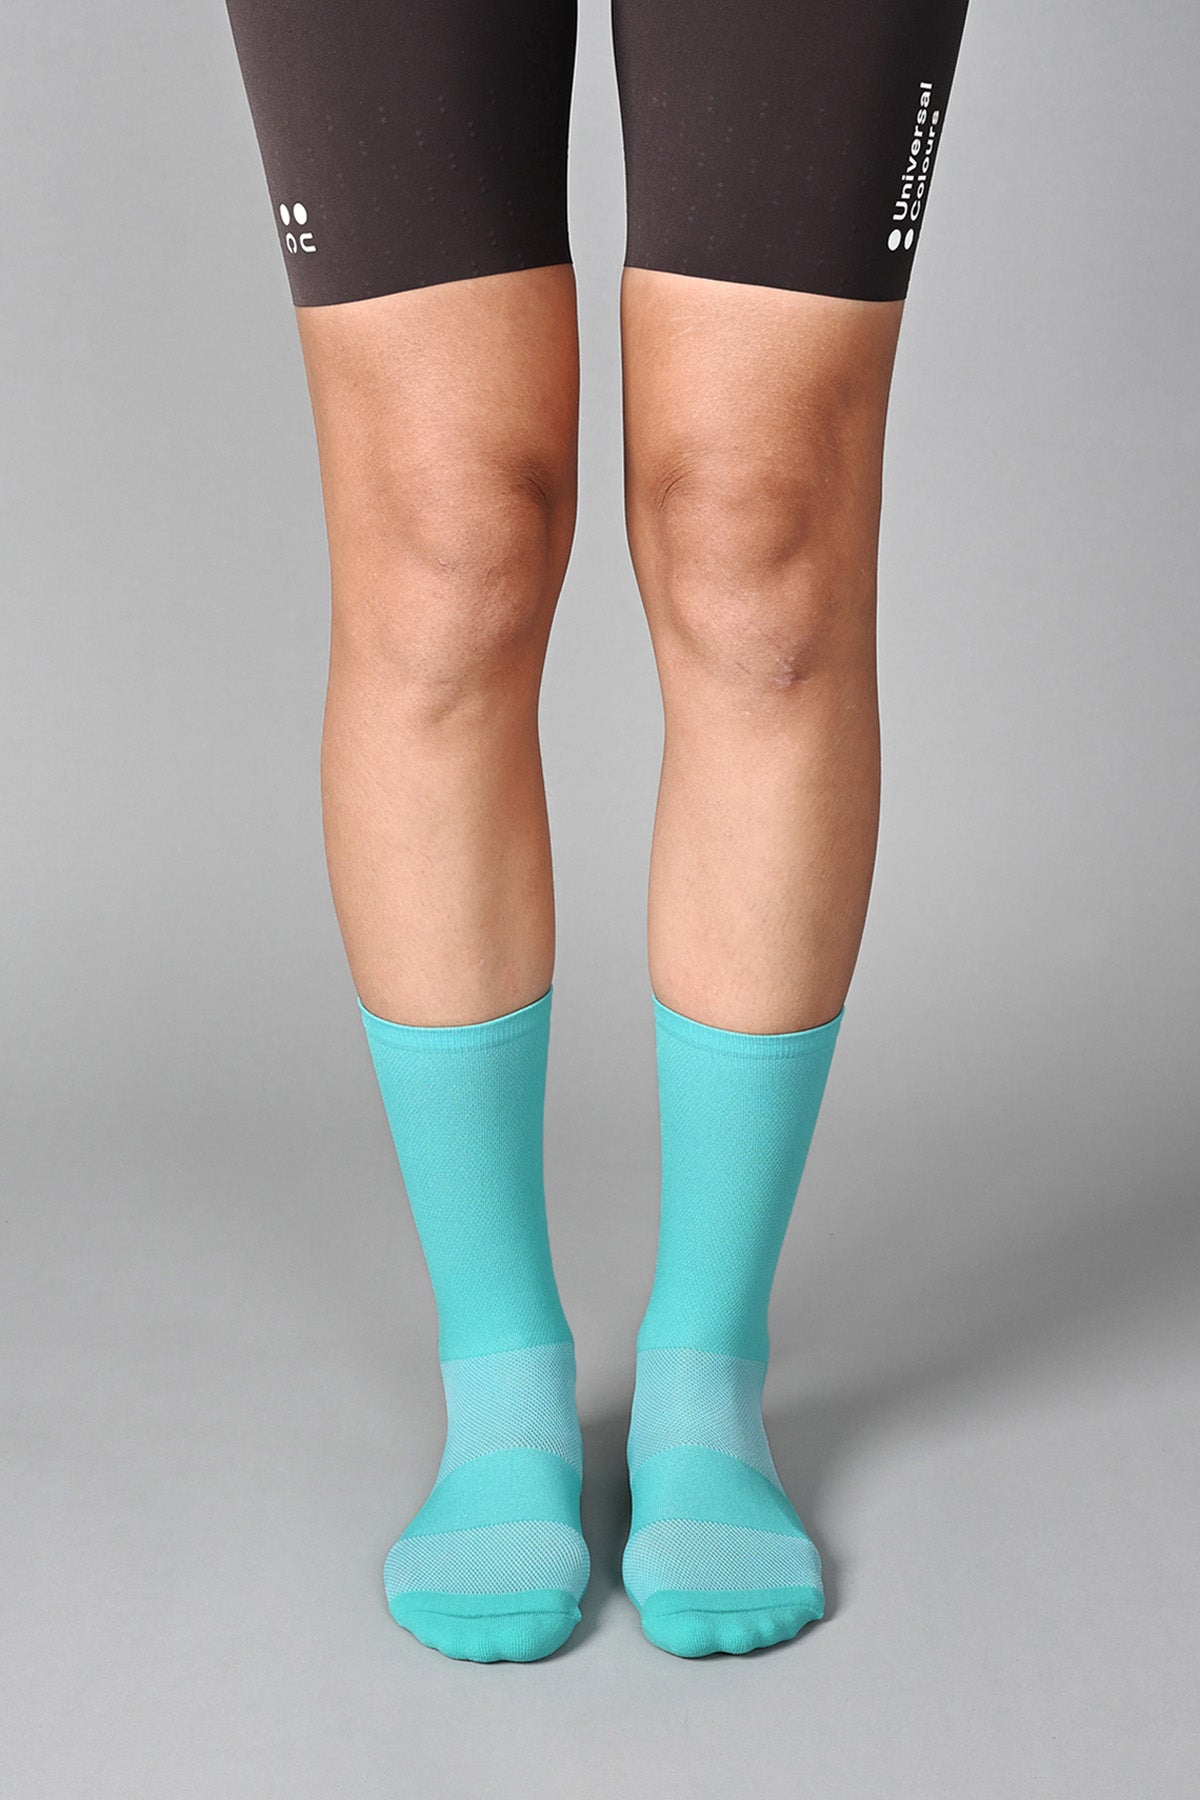 STEALTH - TIFFANY BLUE FRONT | BEST CYCLING SOCKS